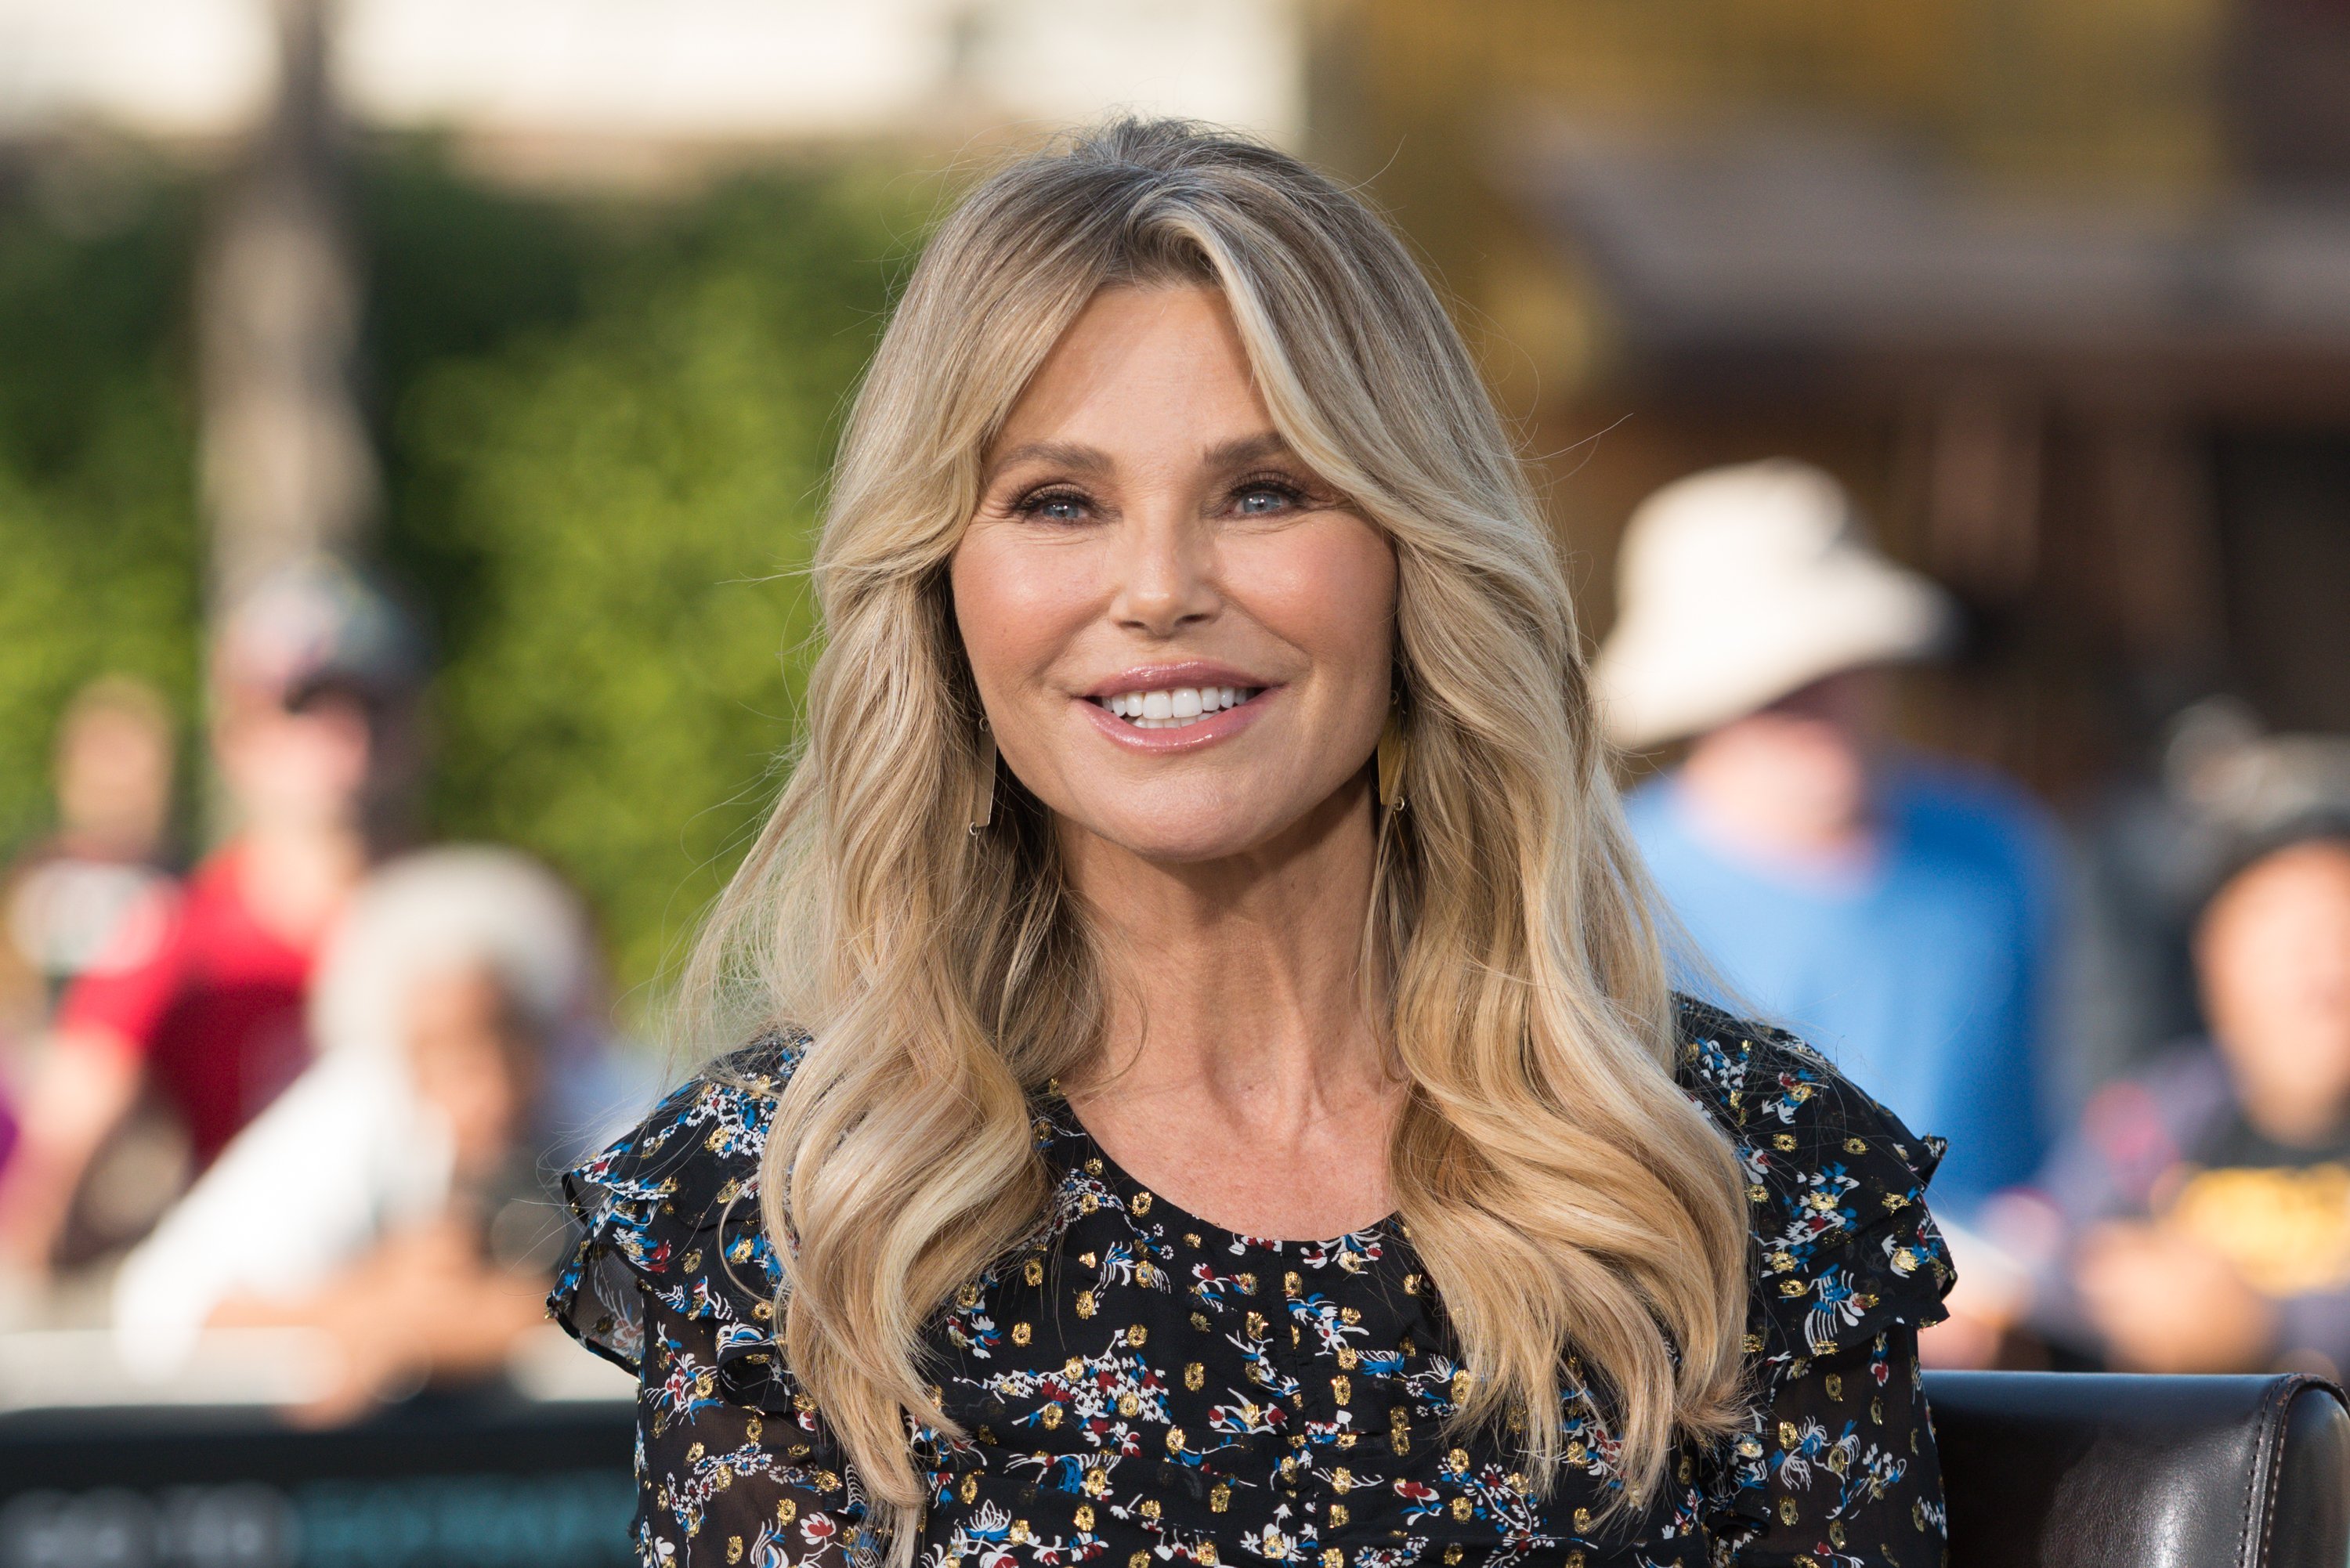 65-year-old Christie Brinkley visiting the studio of "Extra" in January 2018. | Photo: Getty Images